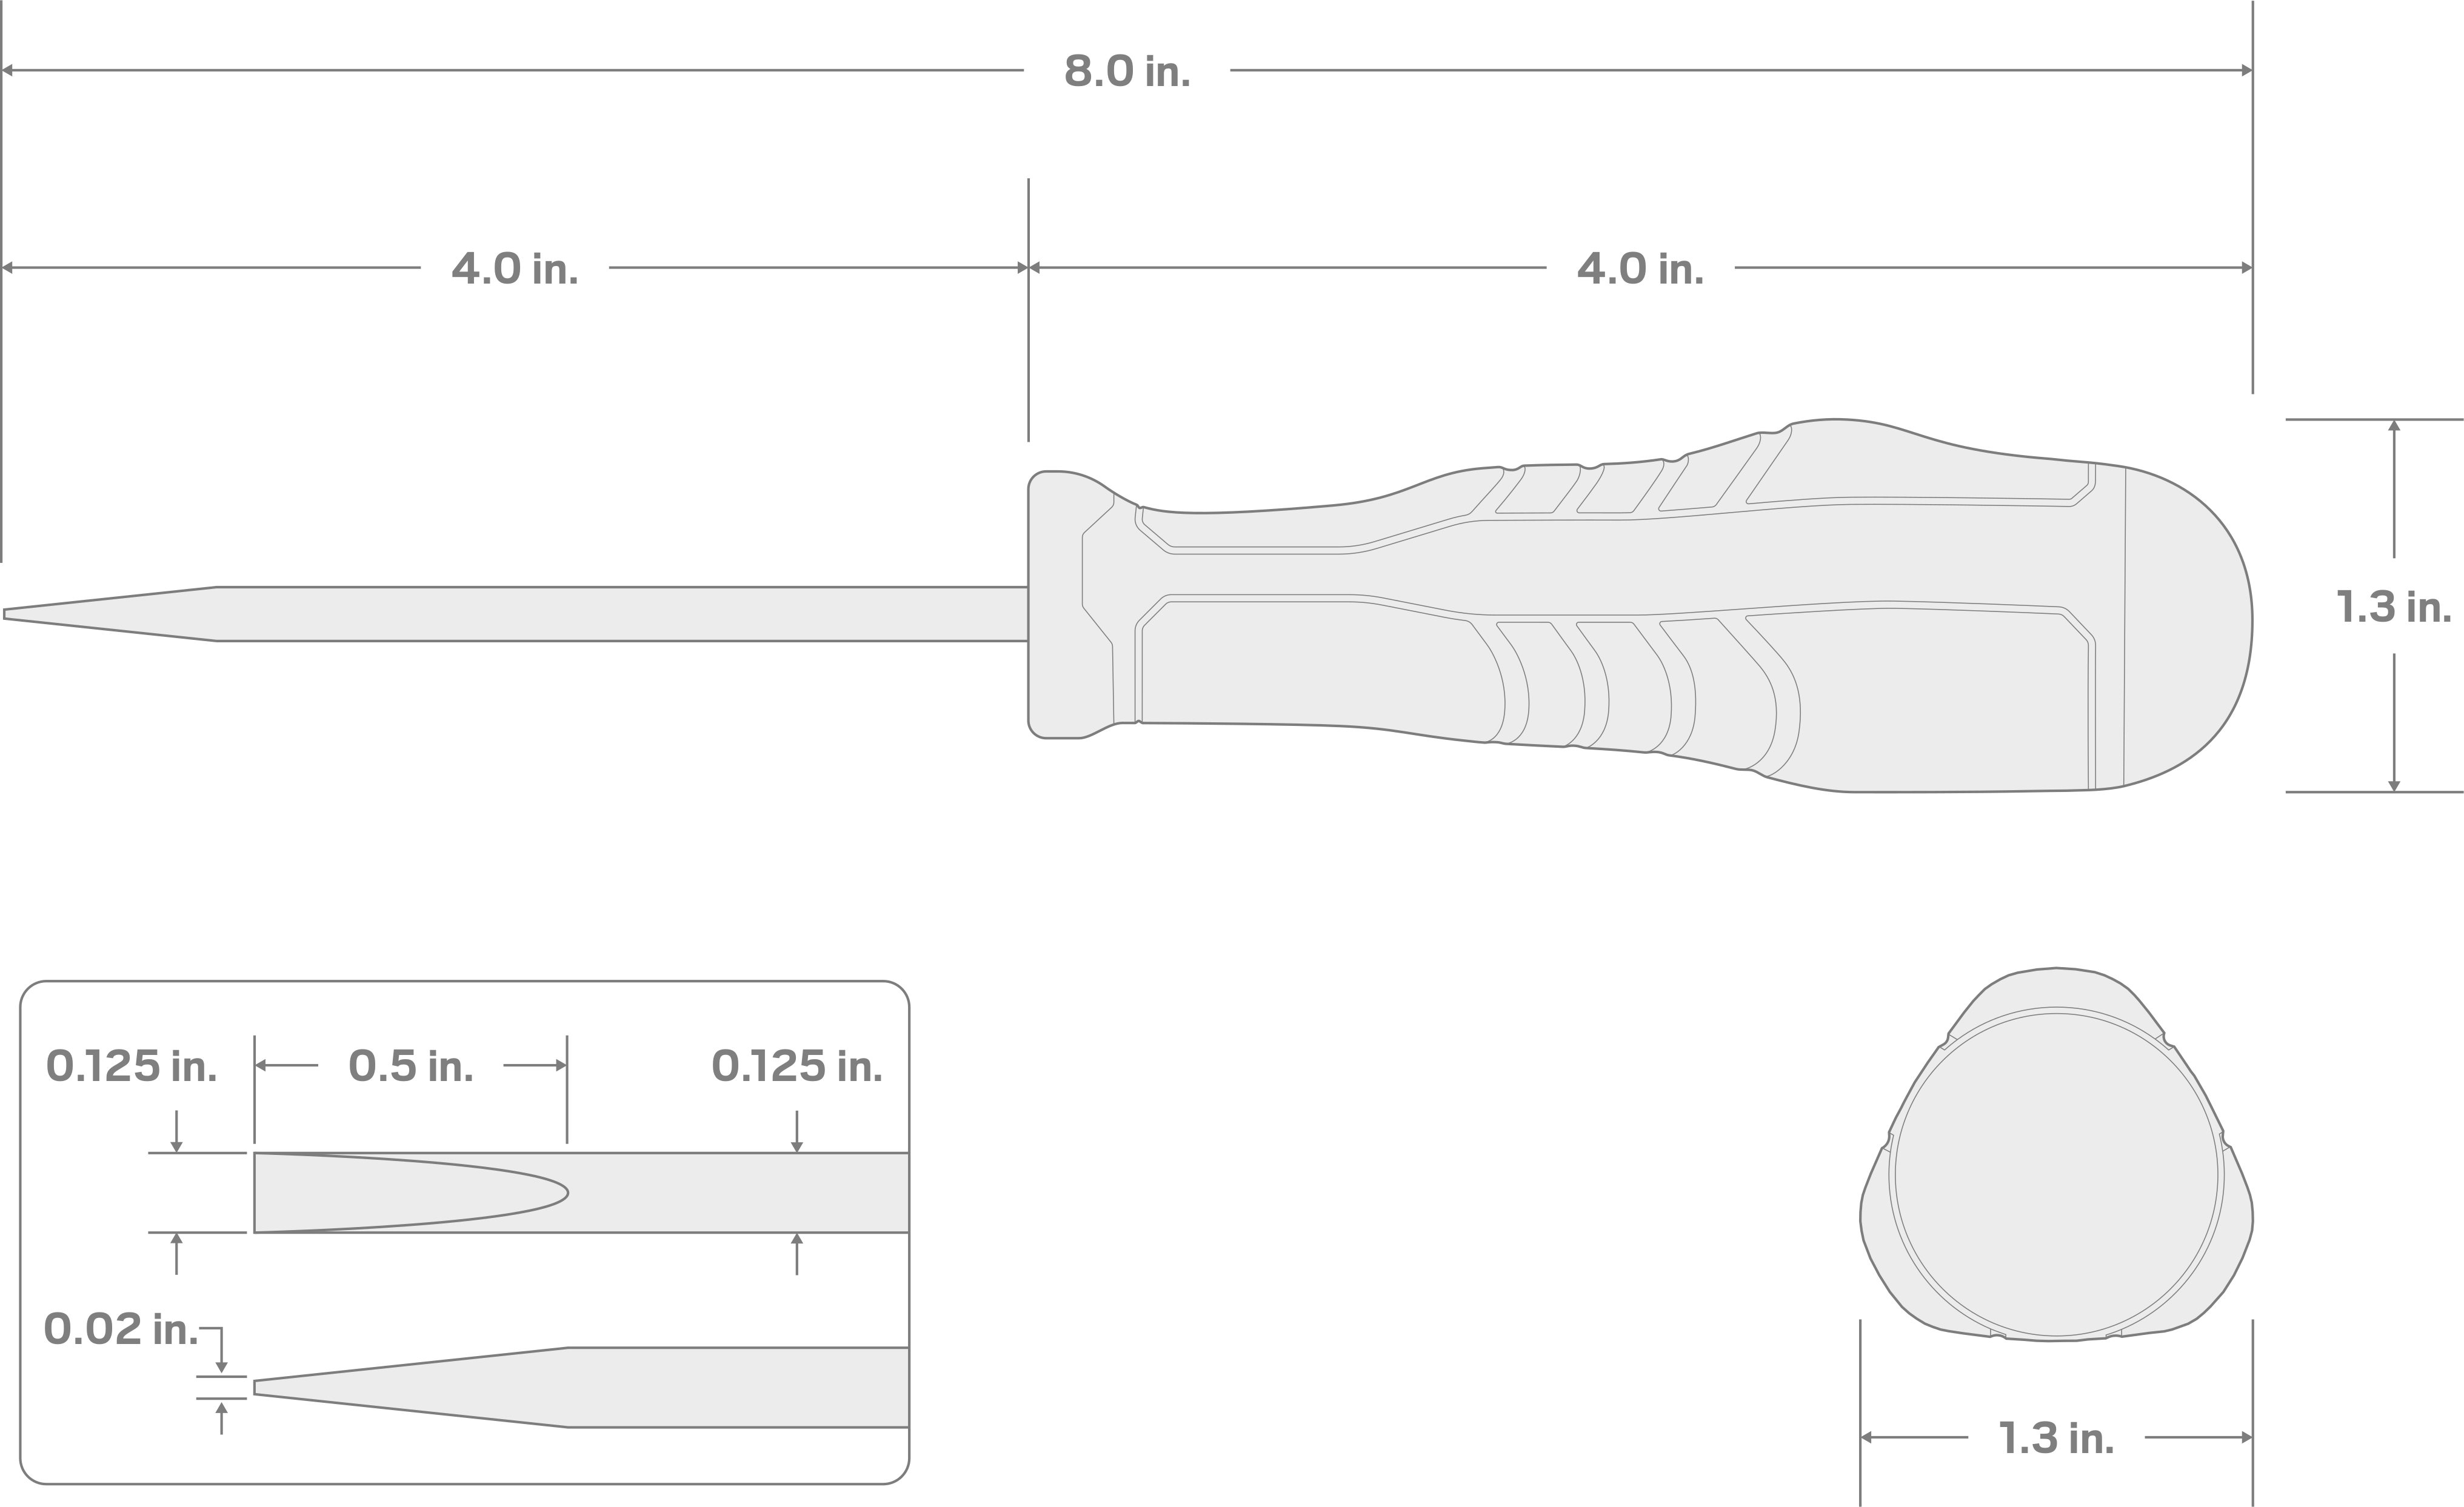 Specs for 1/8 Inch Slotted High-Torque Screwdriver